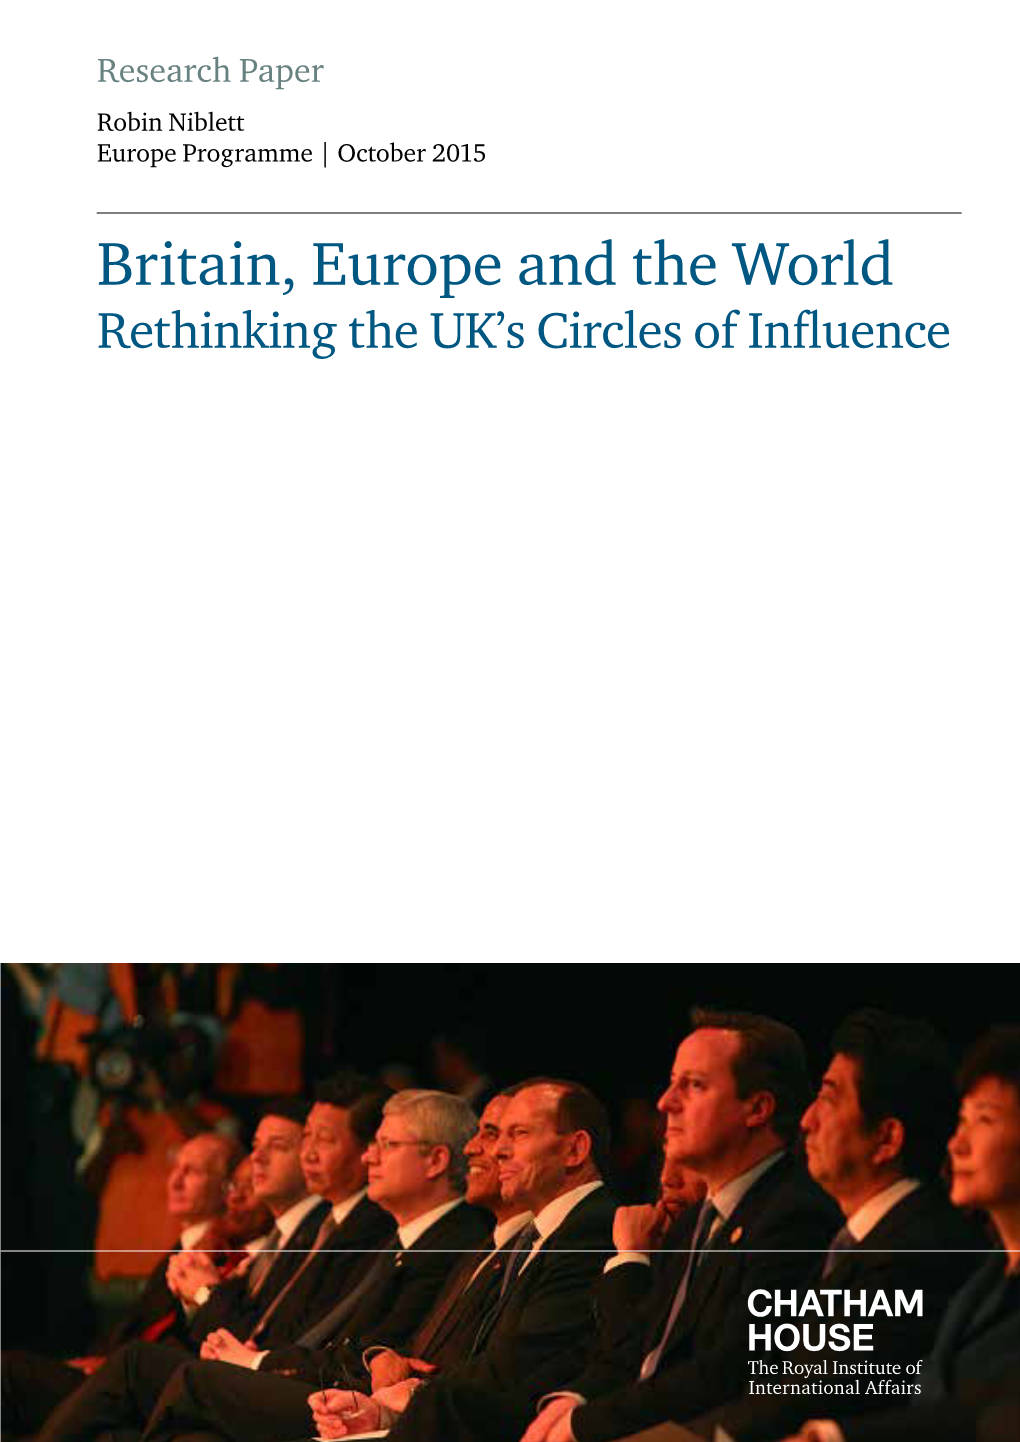 Britain, Europe and the World: Rethinking the UK's Circles of Influence